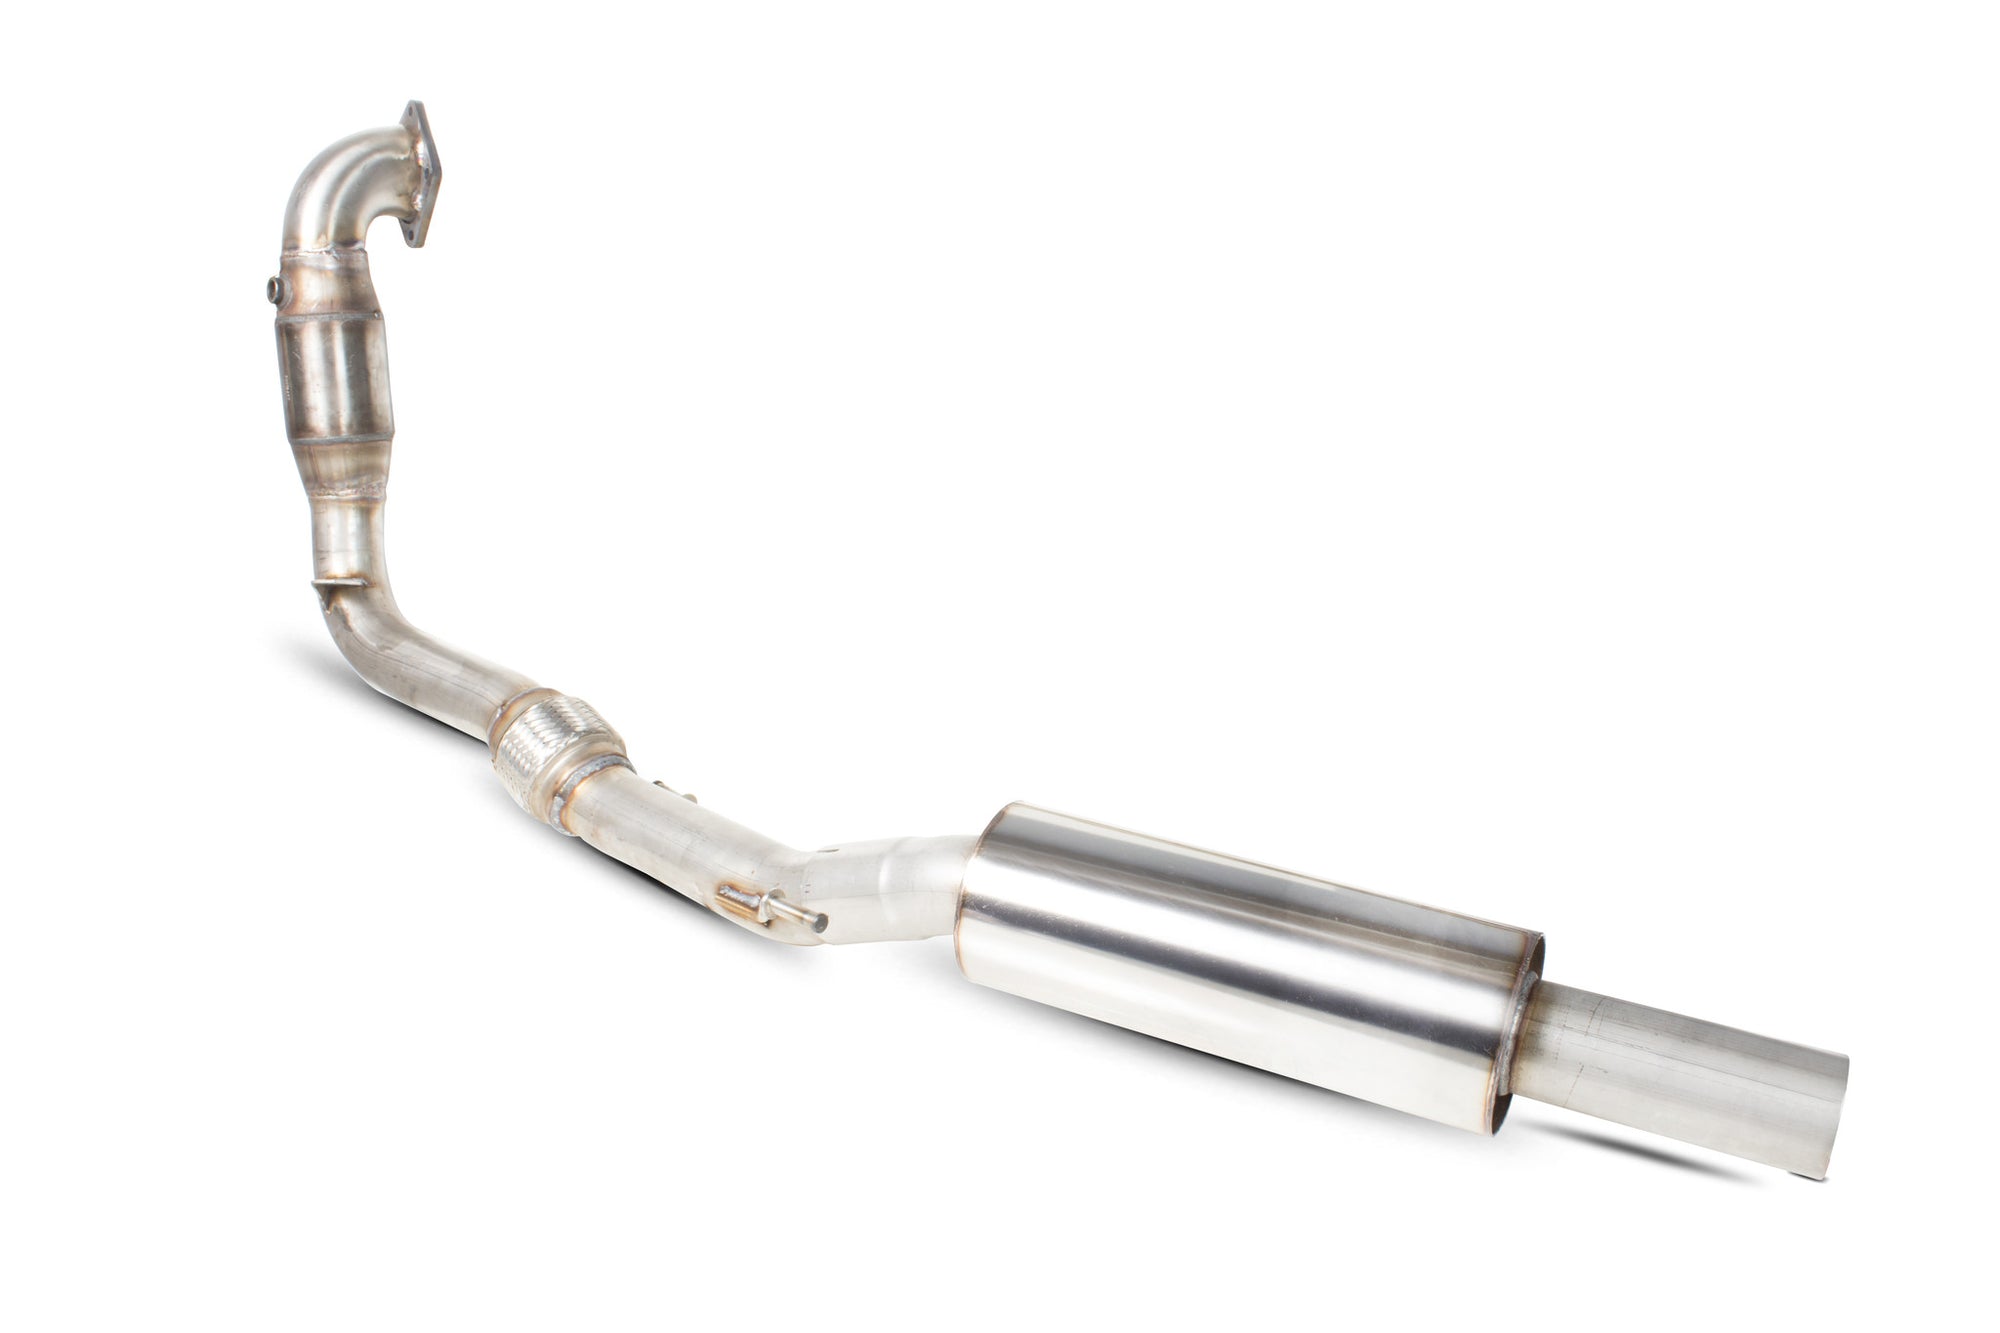 Volkswagen Polo Gti 1.4TSi 180PS Downpipe with high flow sports catalyst (resonated)